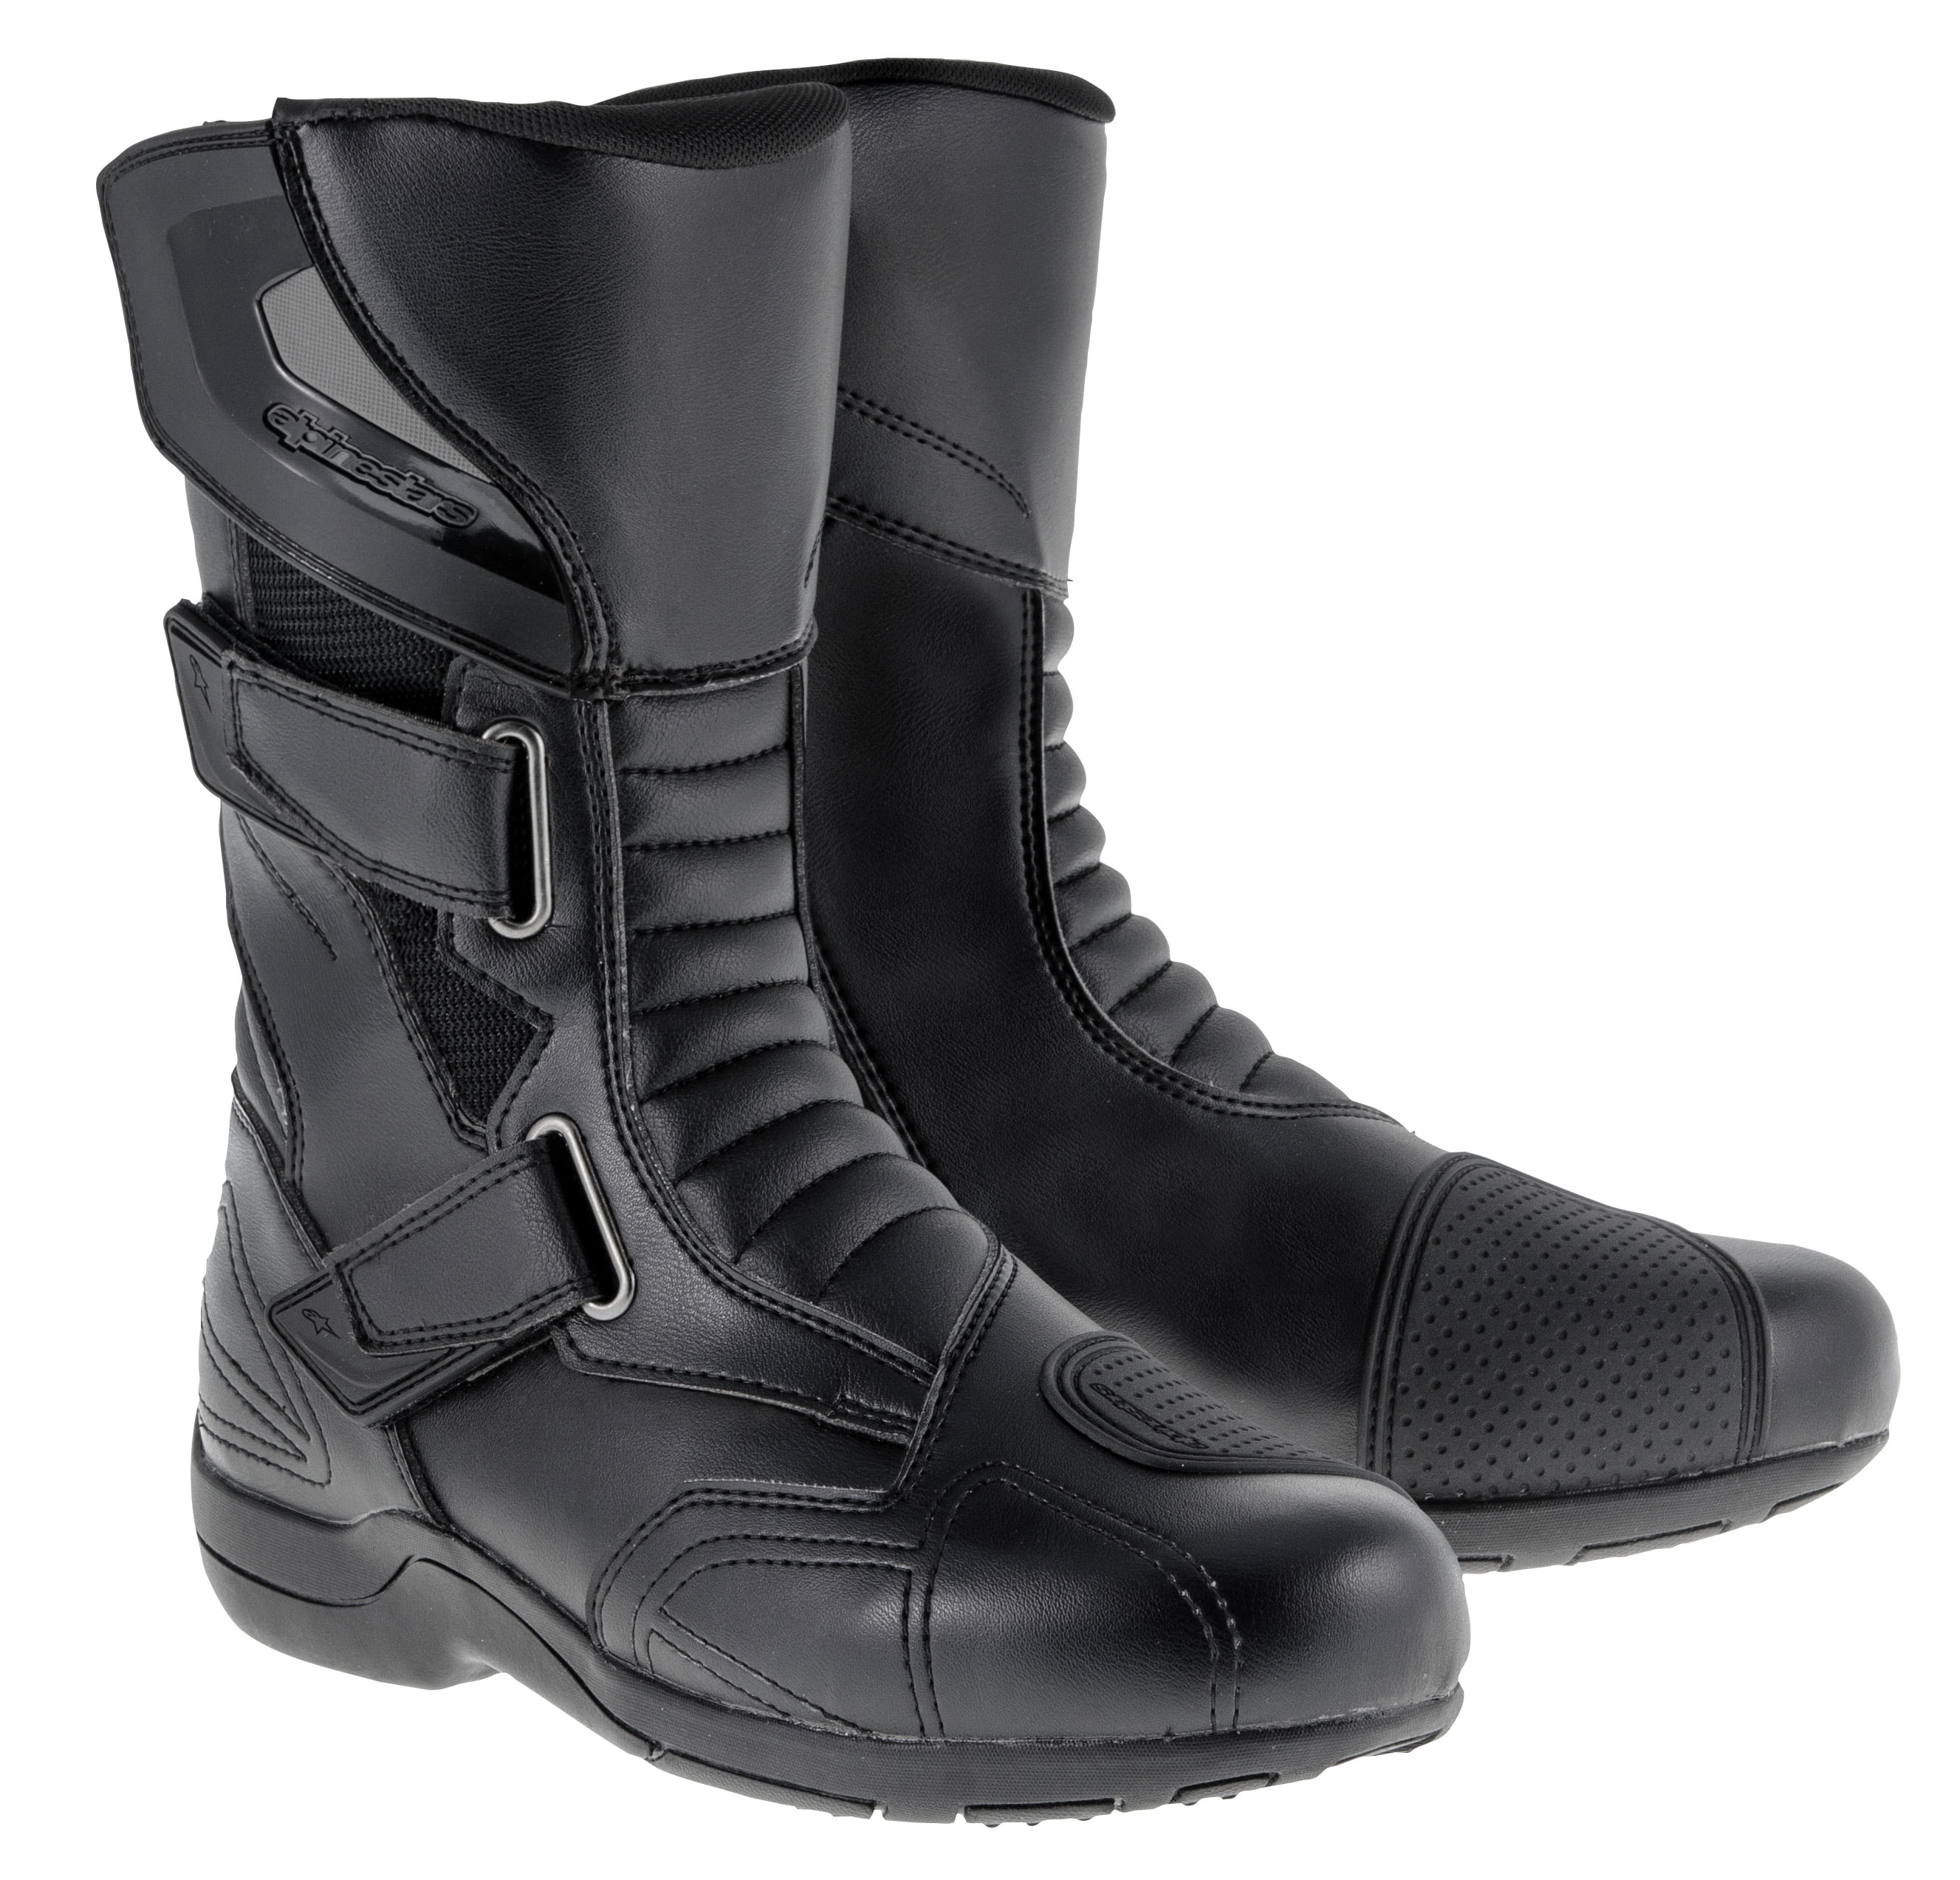 waterproof touring motorcycle boots